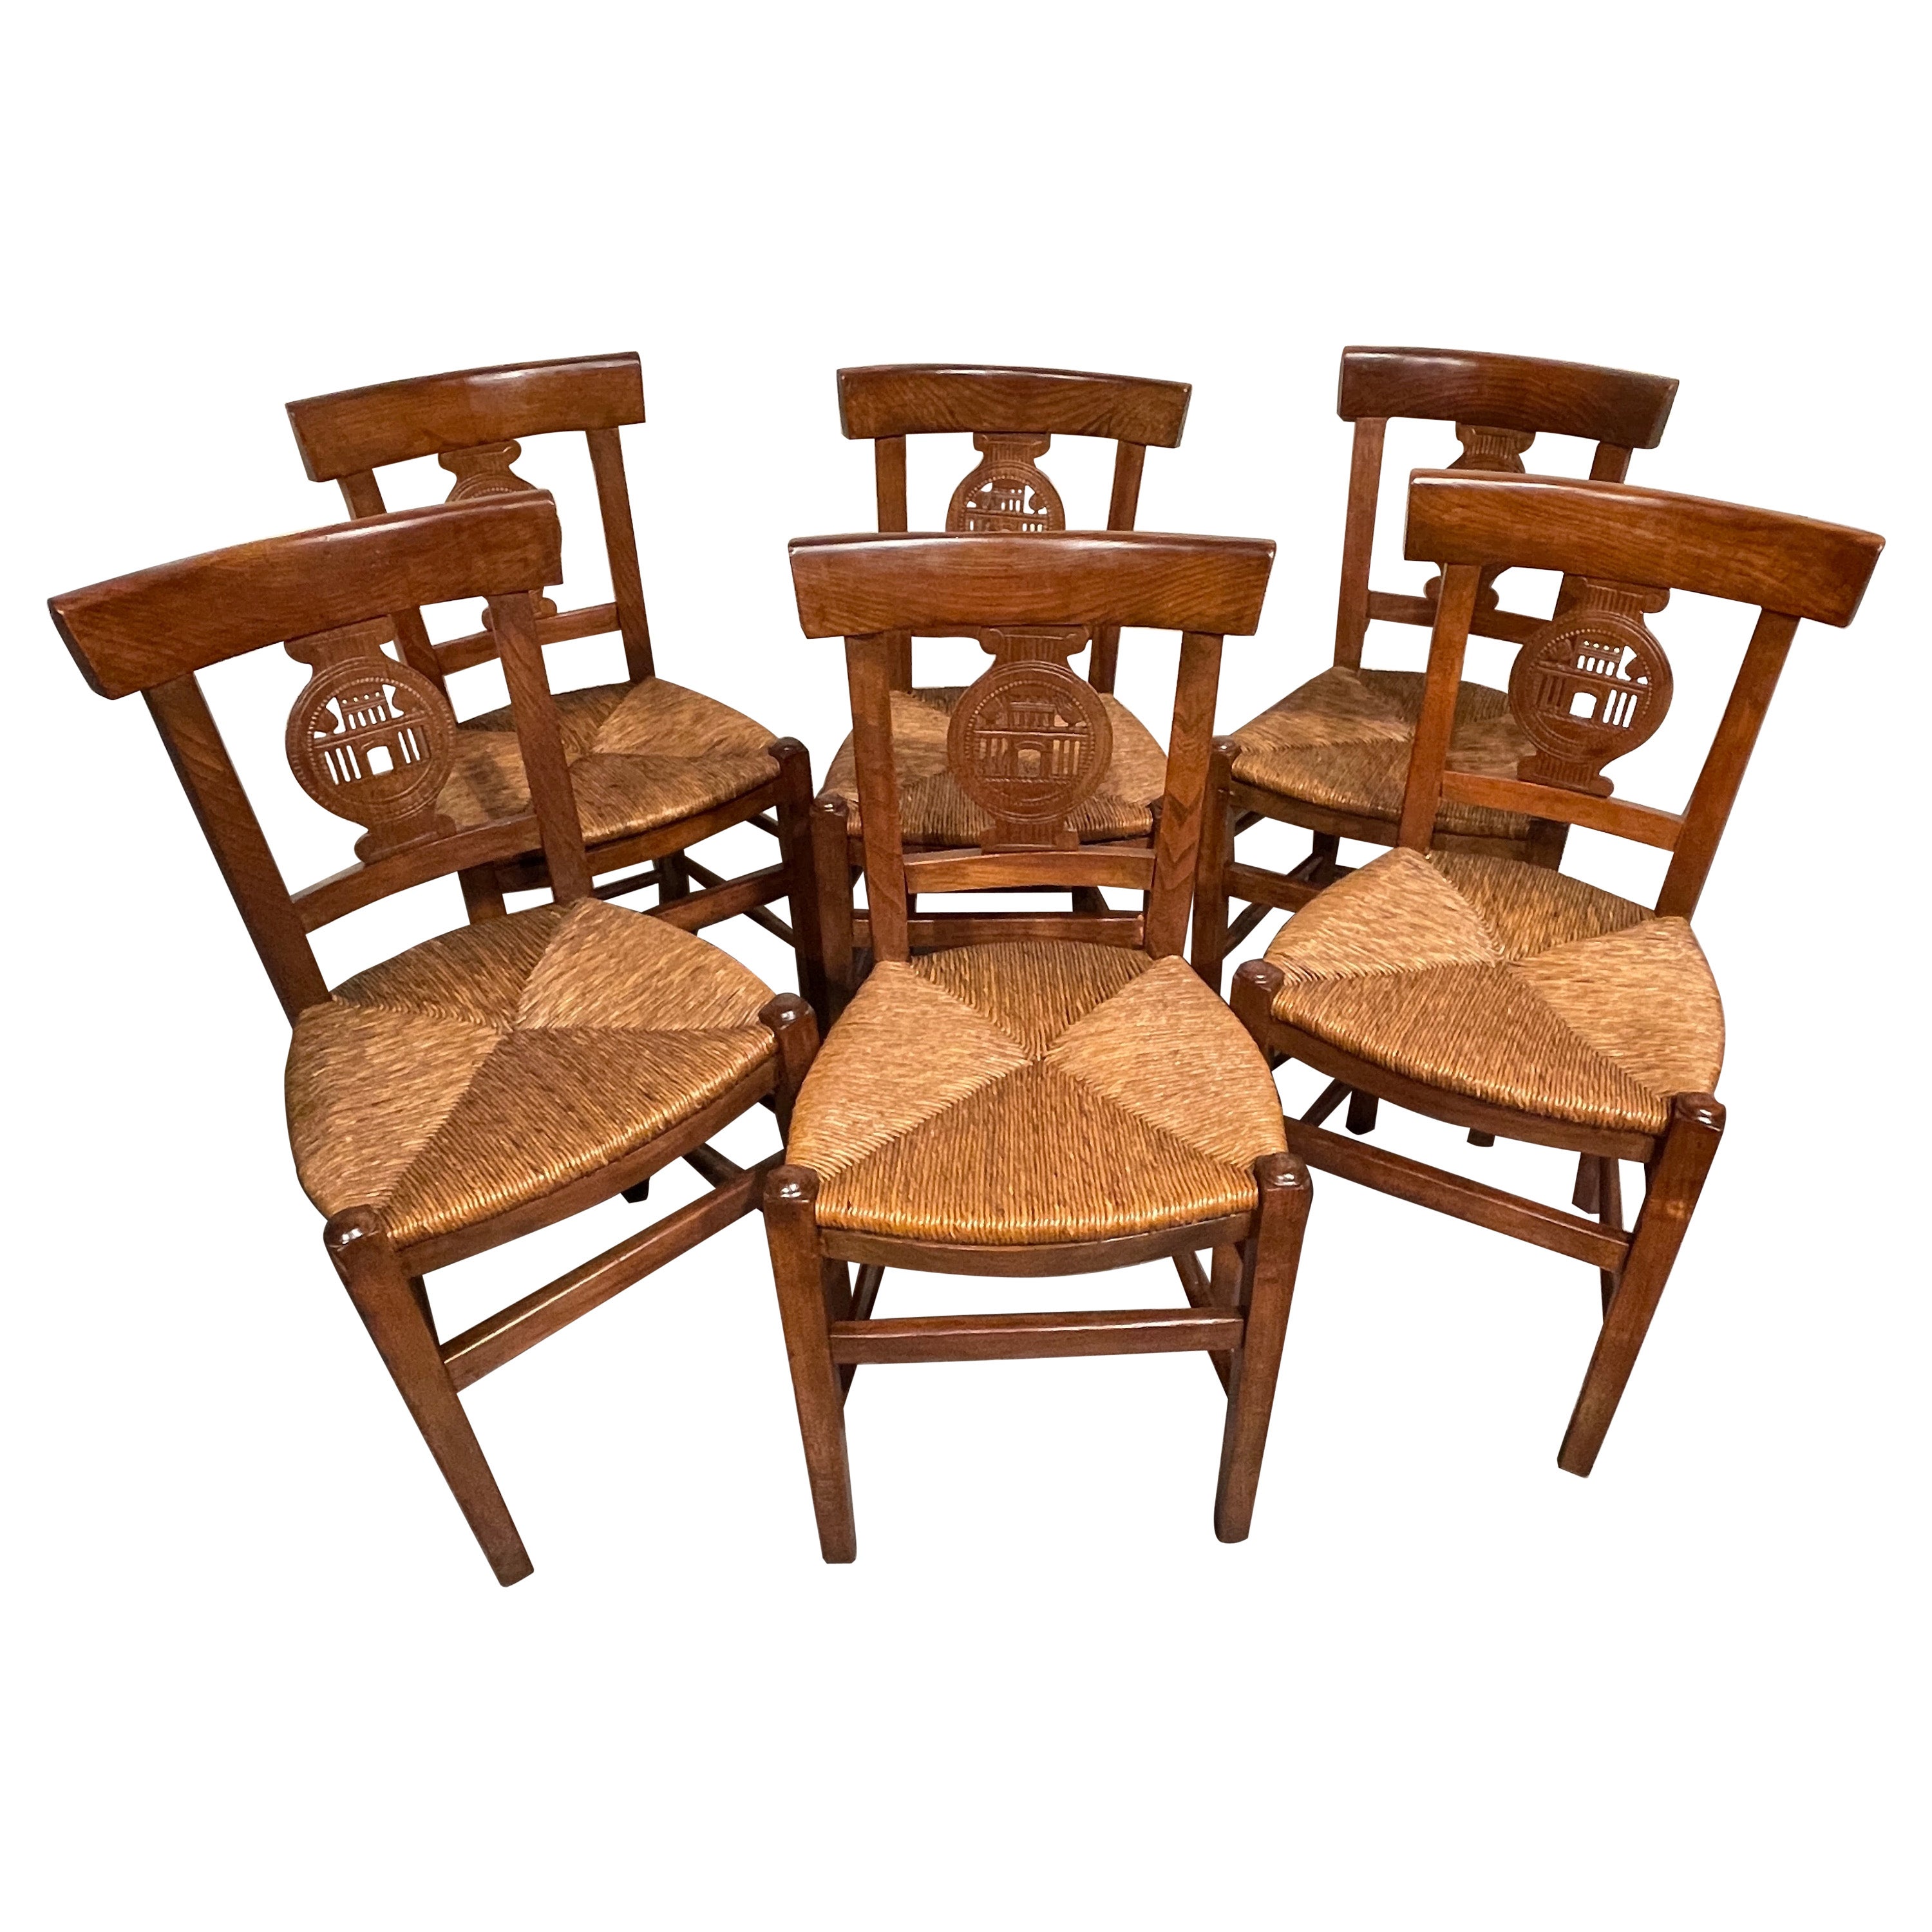 Set of Six Worpsweder Chairs, Germany, 19th Century For Sale